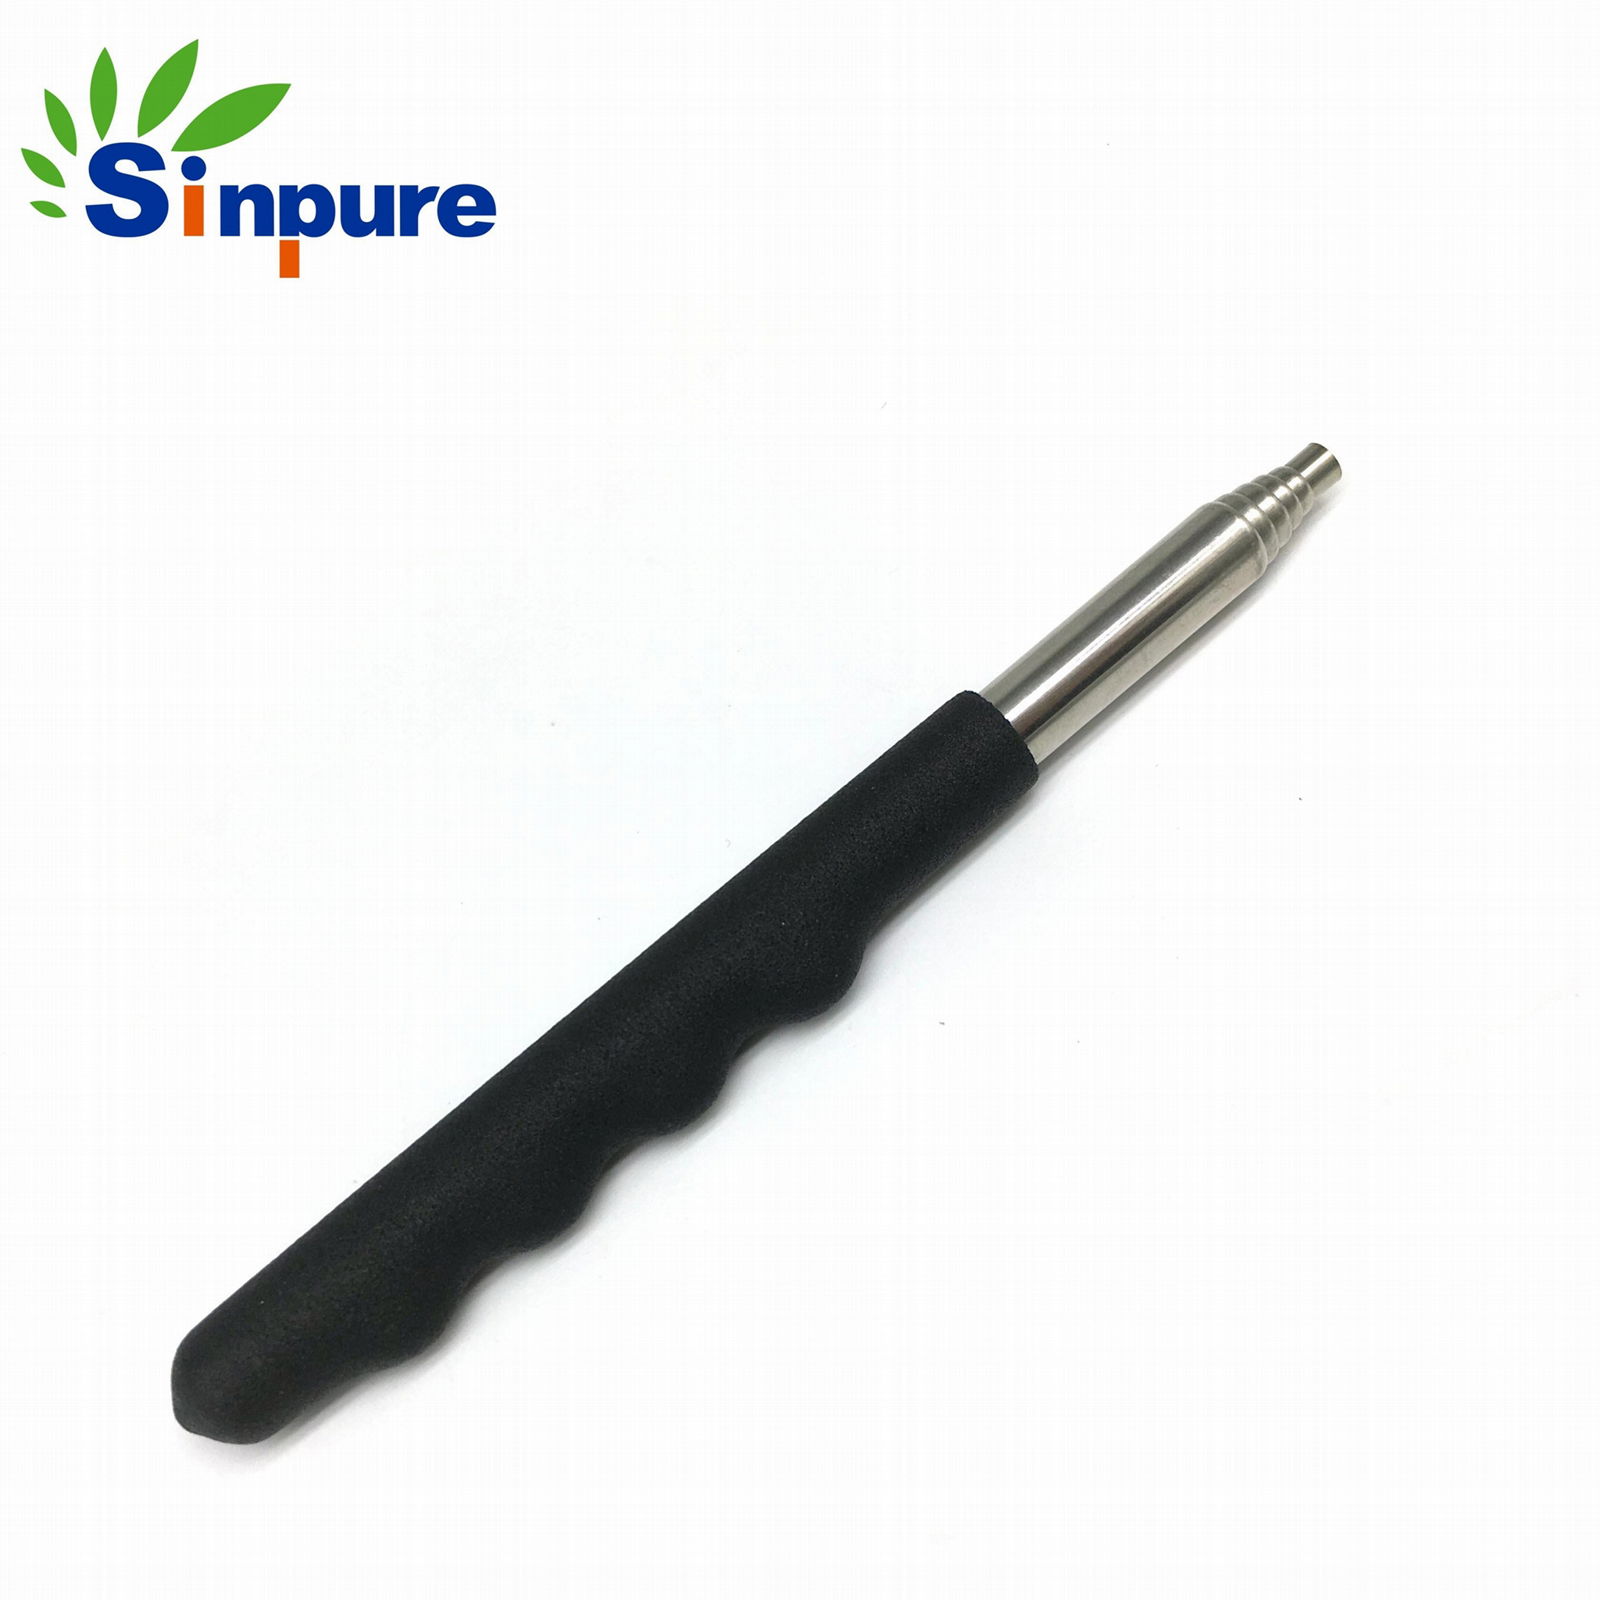 China Suppliers Customized Stainless Steel Telescopic Pole with Thread Part 5